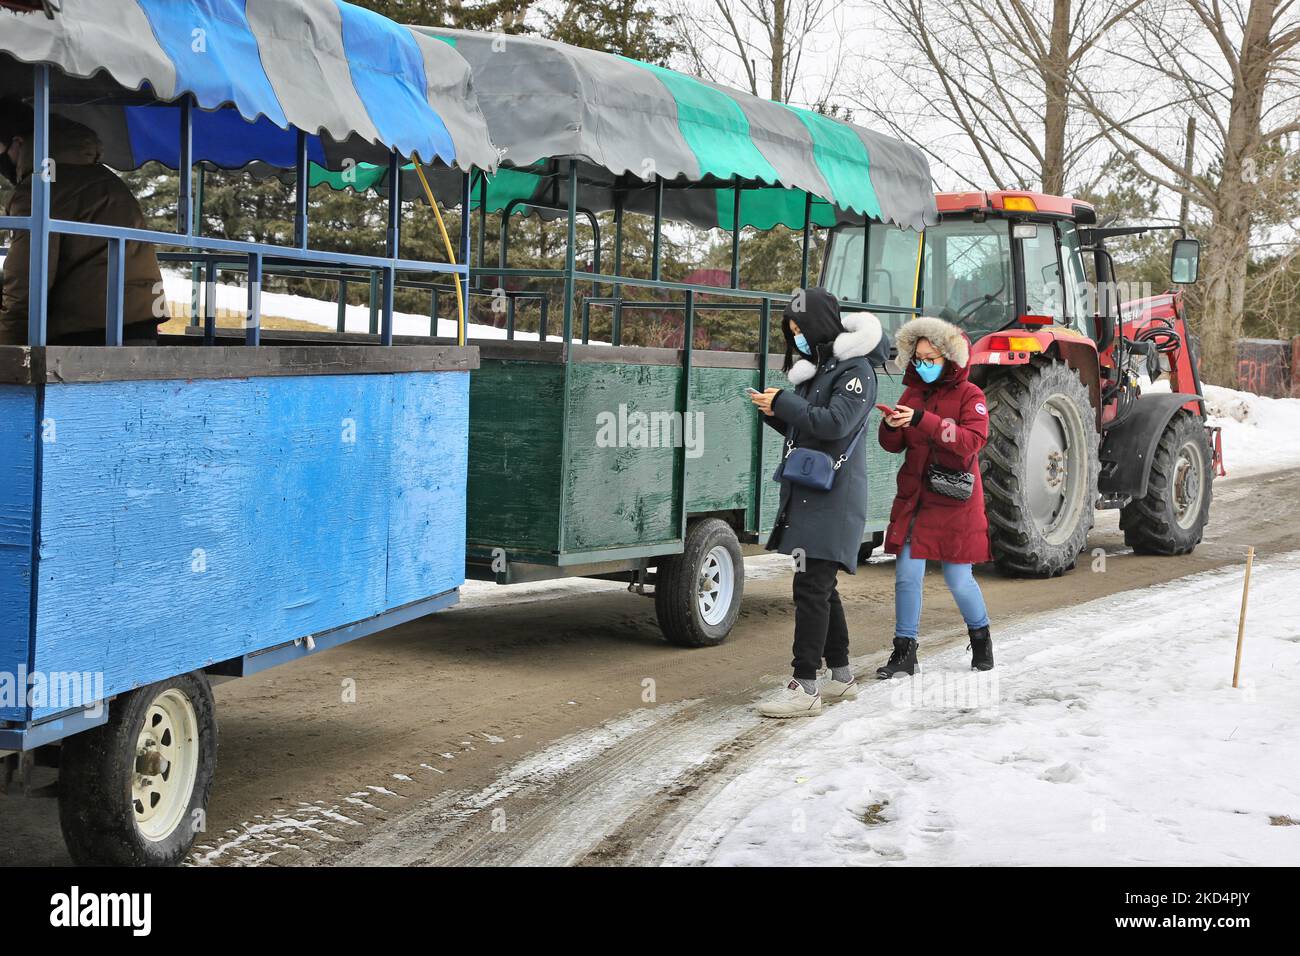 Visitors board cars attached to a tractor to take them to the sugarbush at a maple syrup farm during the Maple Sugar Festival in Mount Albert, Ontario, Canada, on March 05, 2022. The Maple Sugar Festival celebrates maple syrup production and products made with maple syrup and takes part at many maple syrup producing farms across Ontario and Quebec. Maple syrup is only produced in North America. (Photo by Creative Touch Imaging Ltd./NurPhoto) Stock Photo